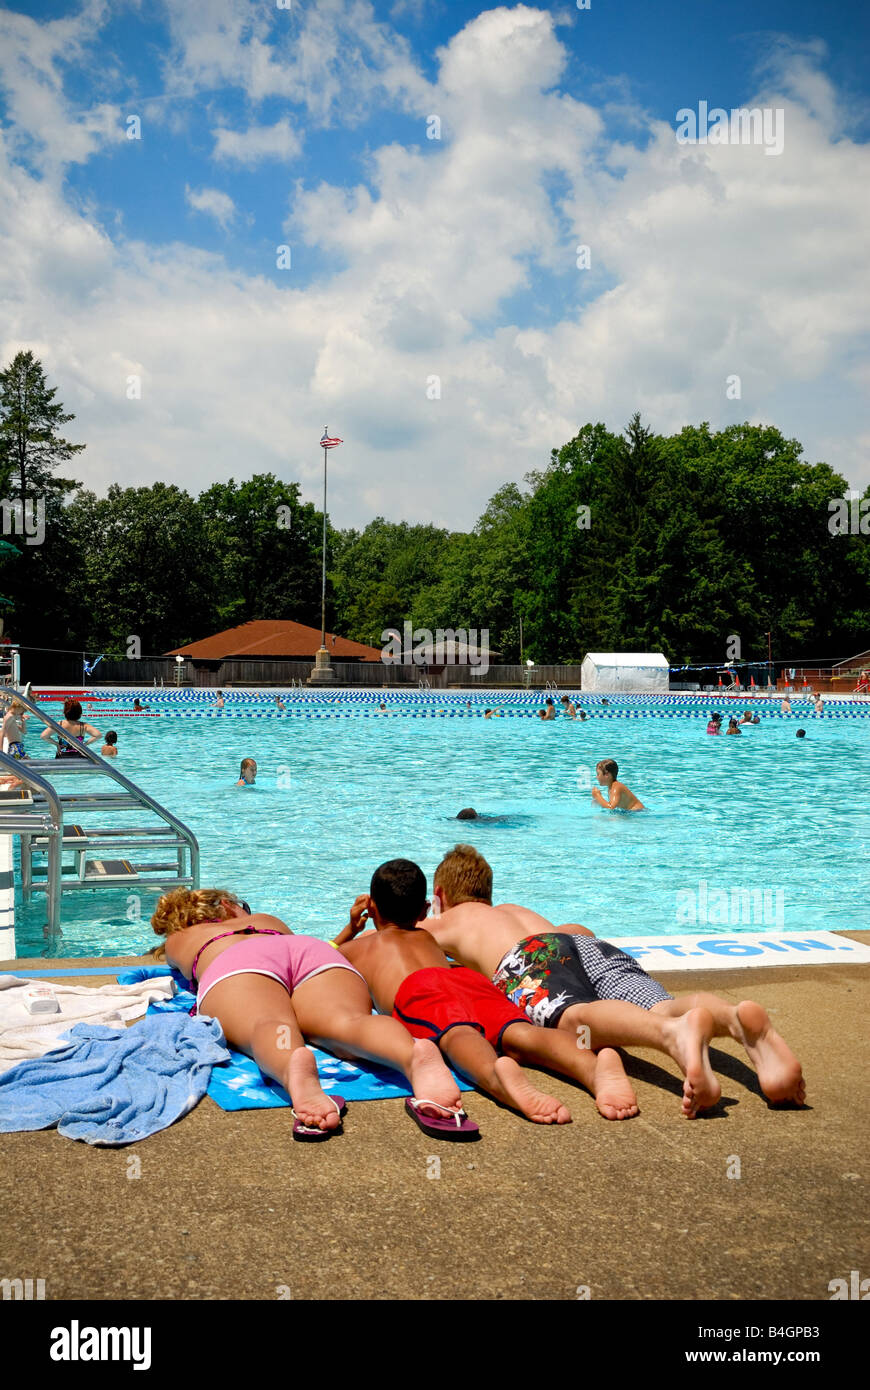 A girl and two boys relax poolside at North Park Pool Pittsburgh PA Stock Photo